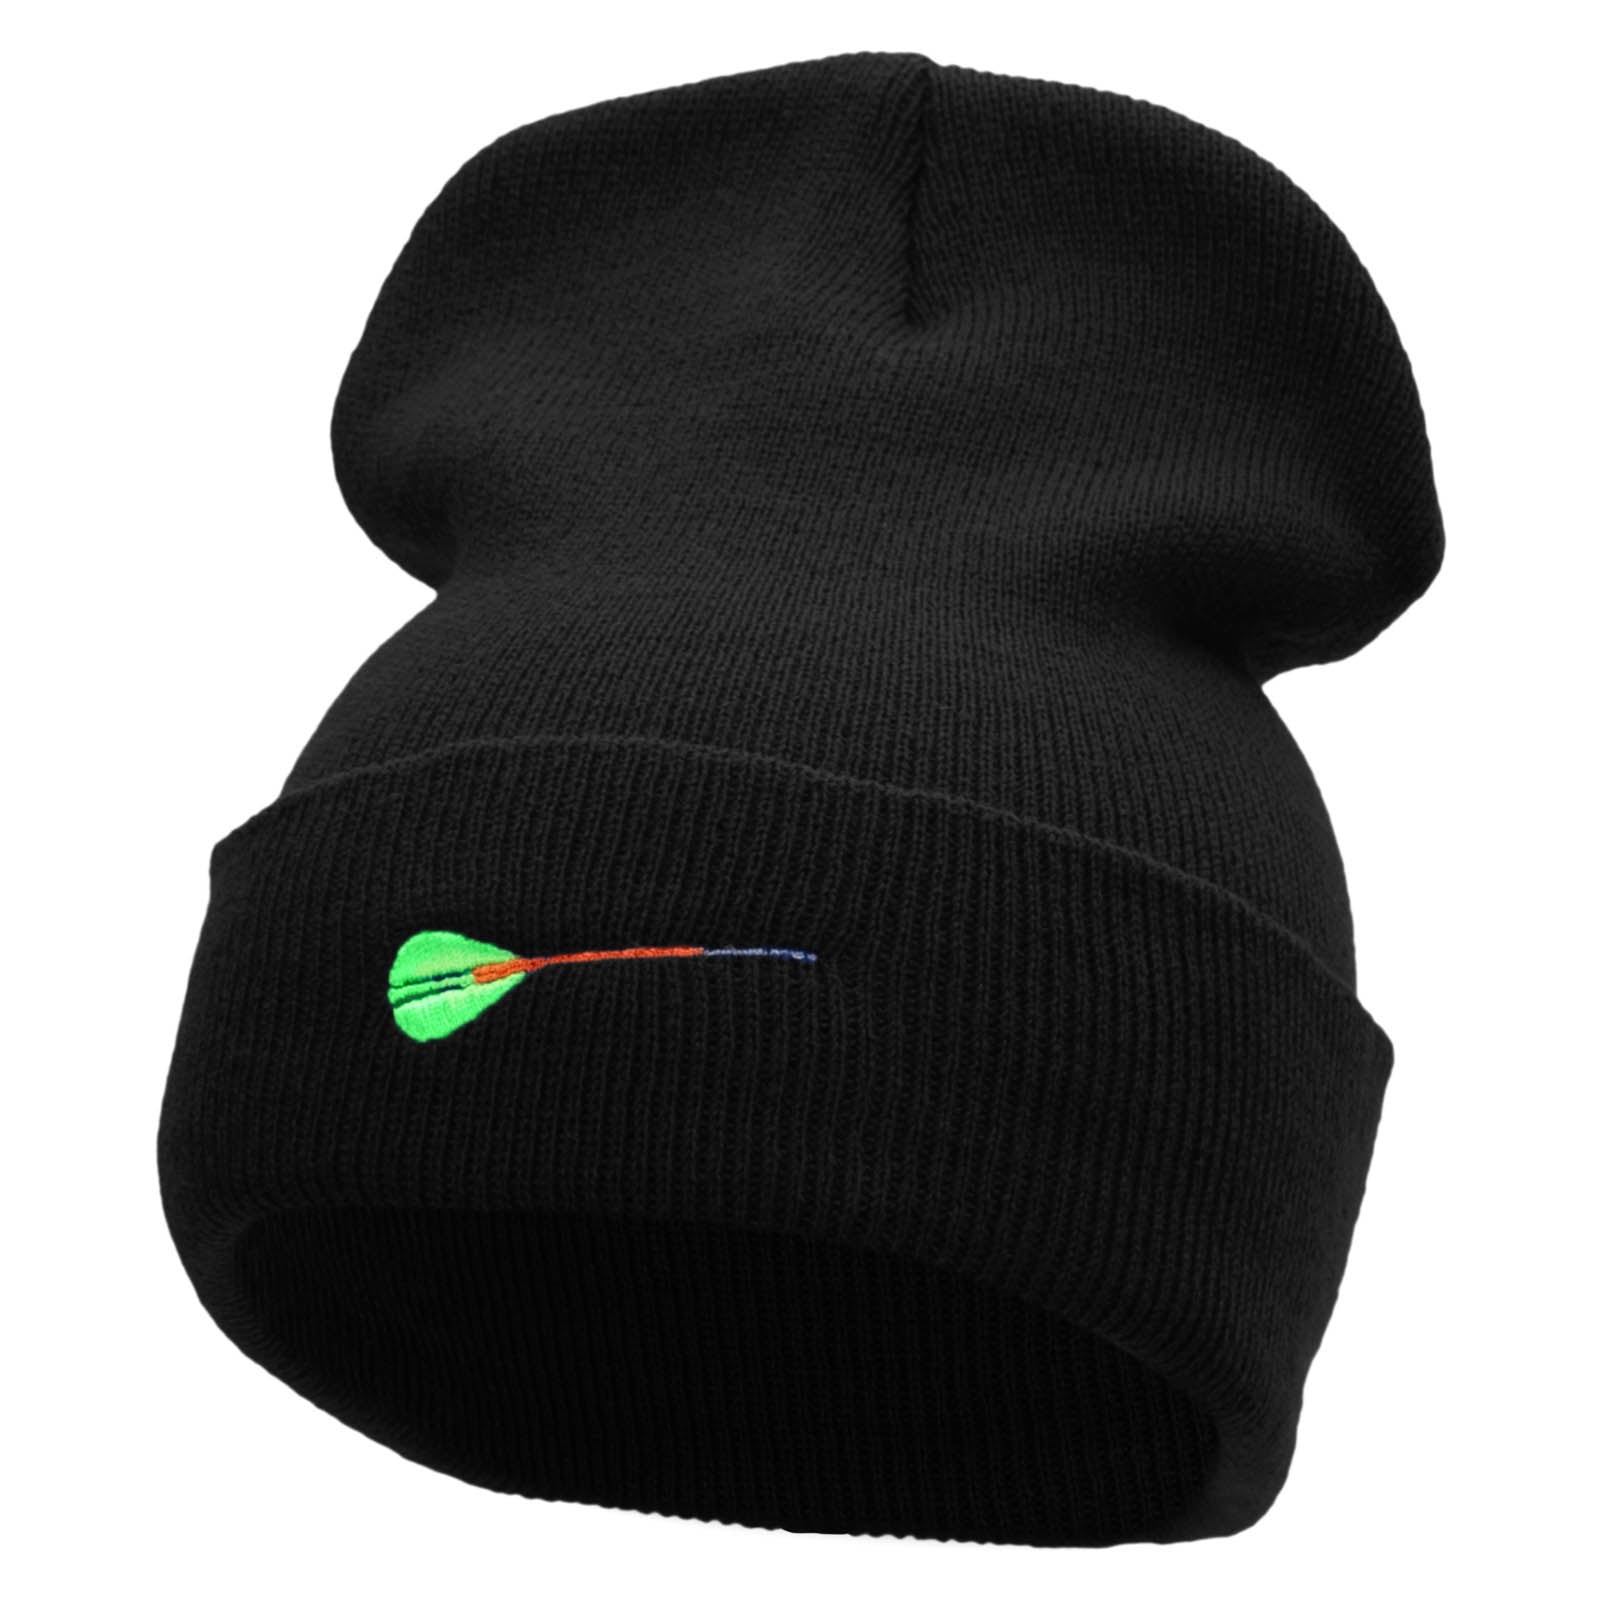 The Dart Embroidered 12 Inch Solid Long Beanie Made in USA - Black OSFM